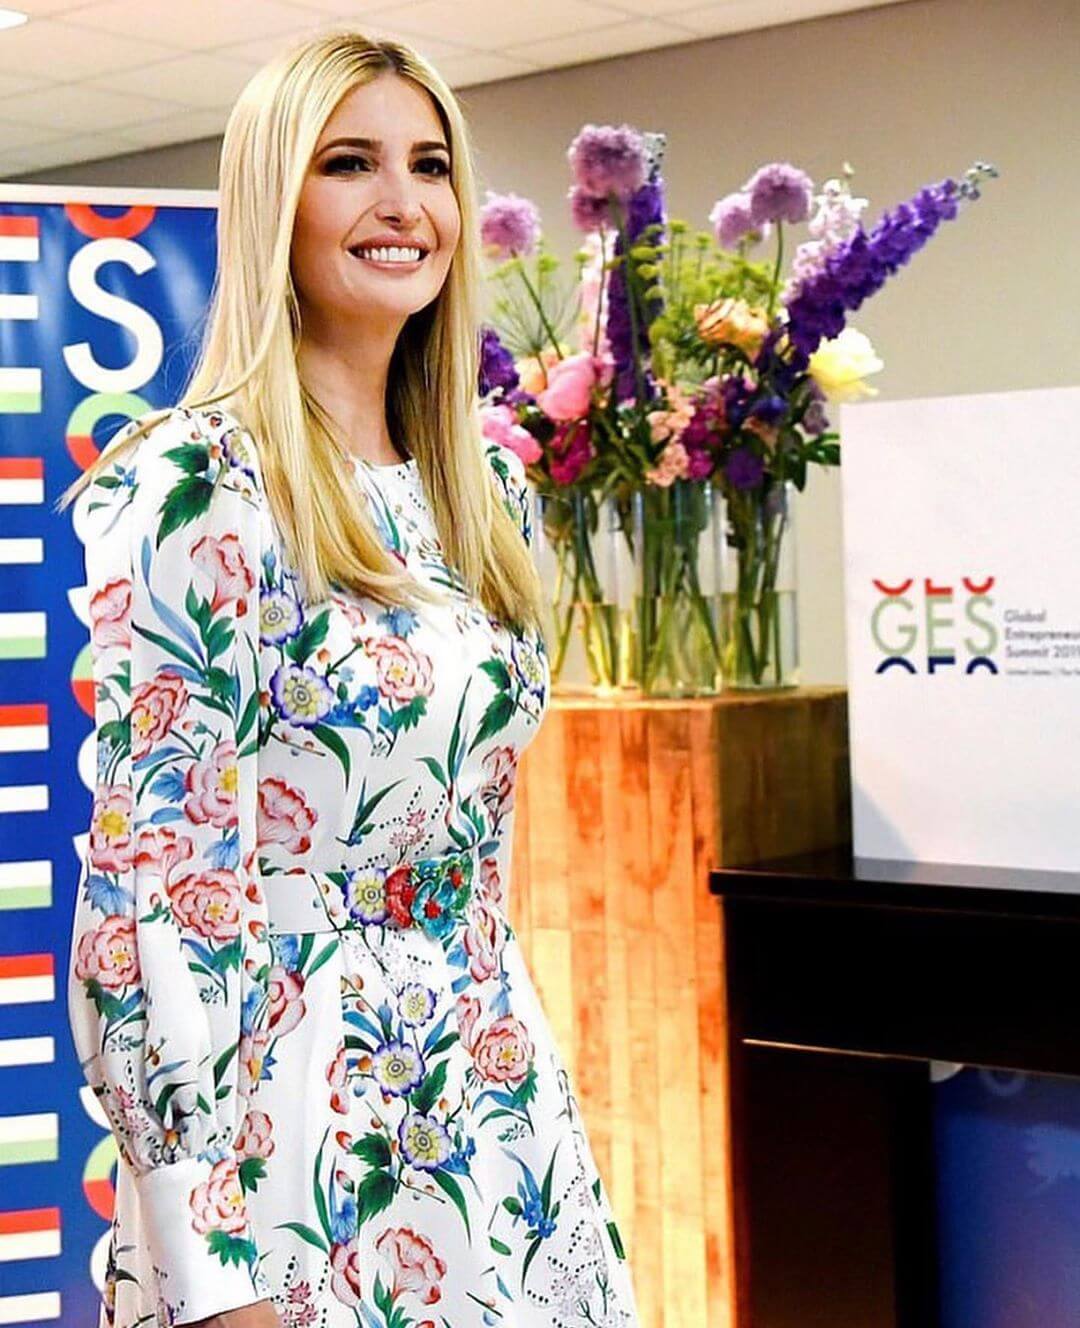 80+ Hot Pictures of Ivanka Trump Will Drive You Mad | Best Of Comic Books